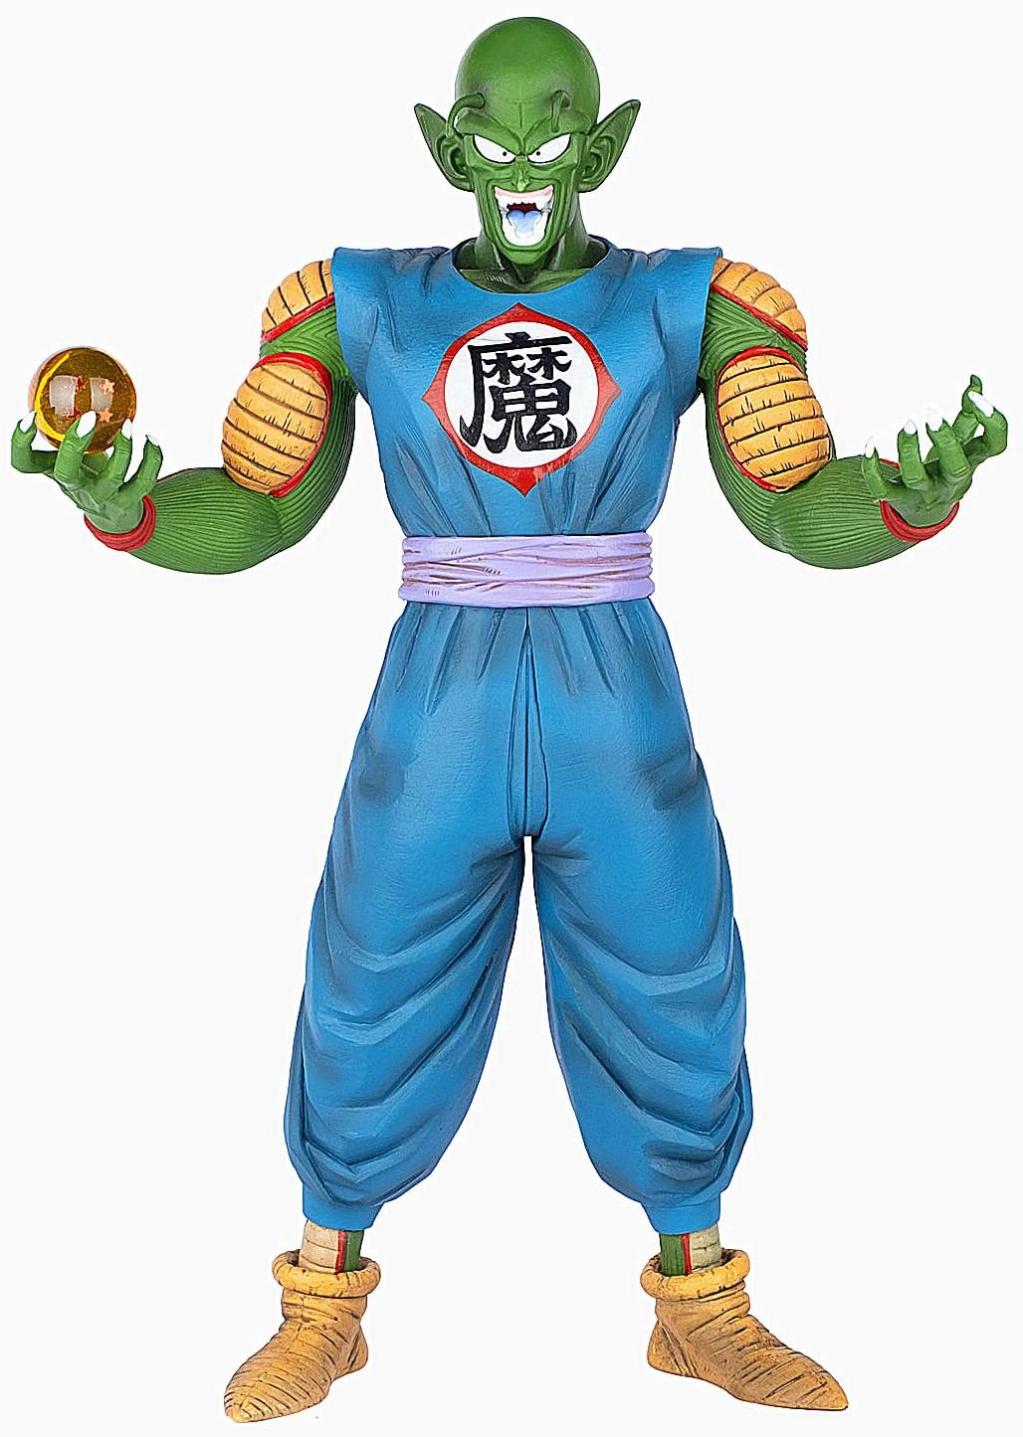 DBZ Piccolo Actions Figure Statue Figurine Collection Birthday Gifts PVC 11 Inch